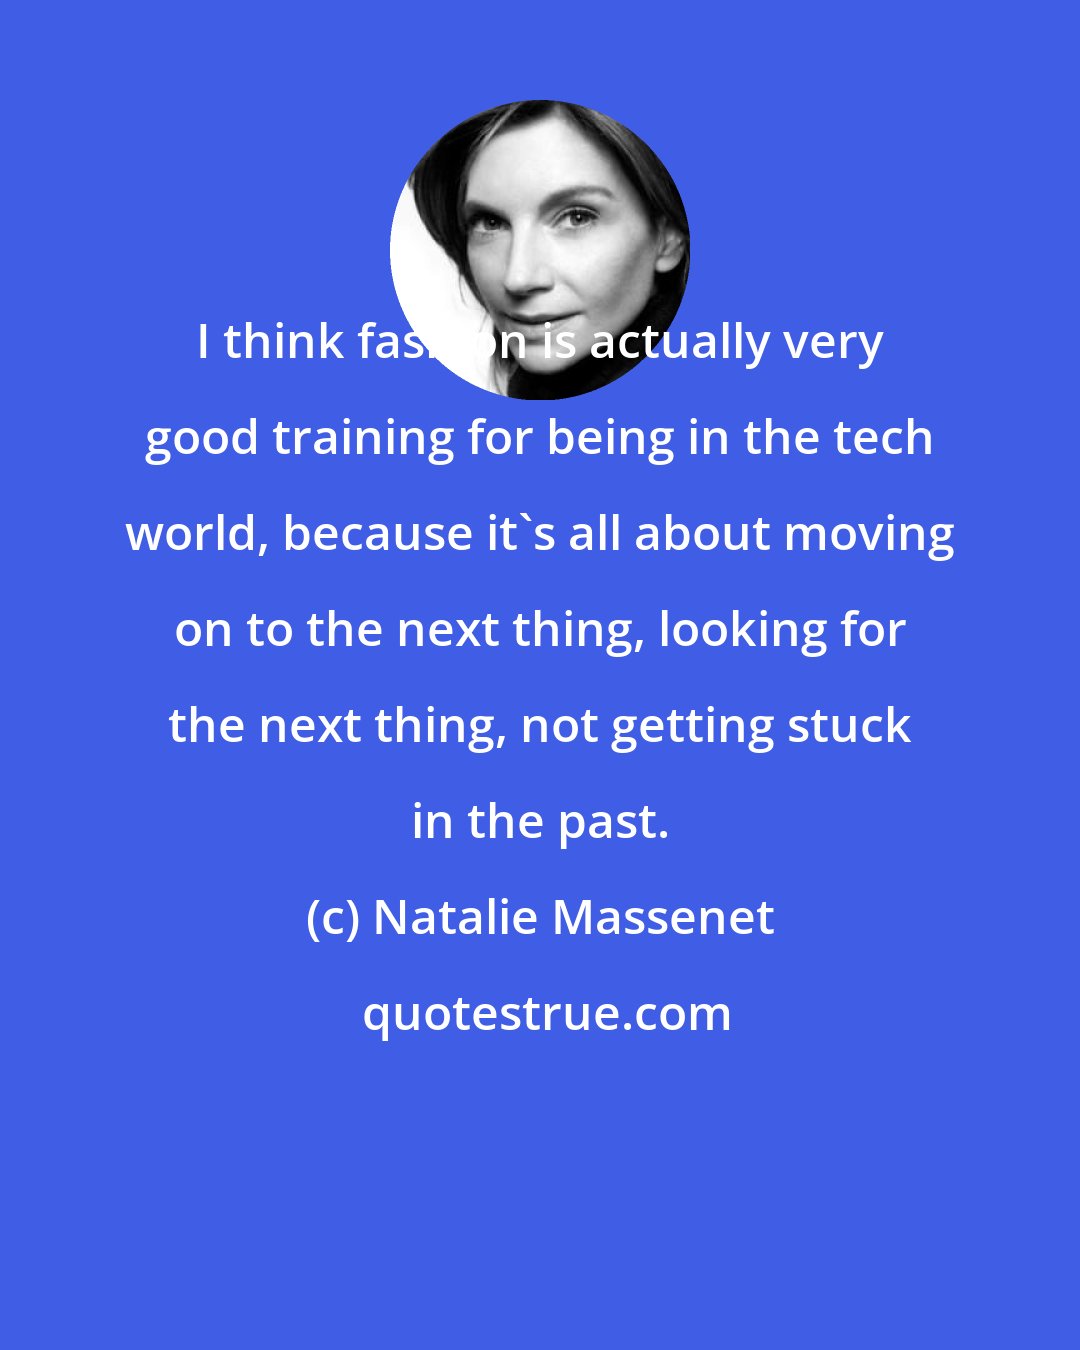 Natalie Massenet: I think fashion is actually very good training for being in the tech world, because it's all about moving on to the next thing, looking for the next thing, not getting stuck in the past.